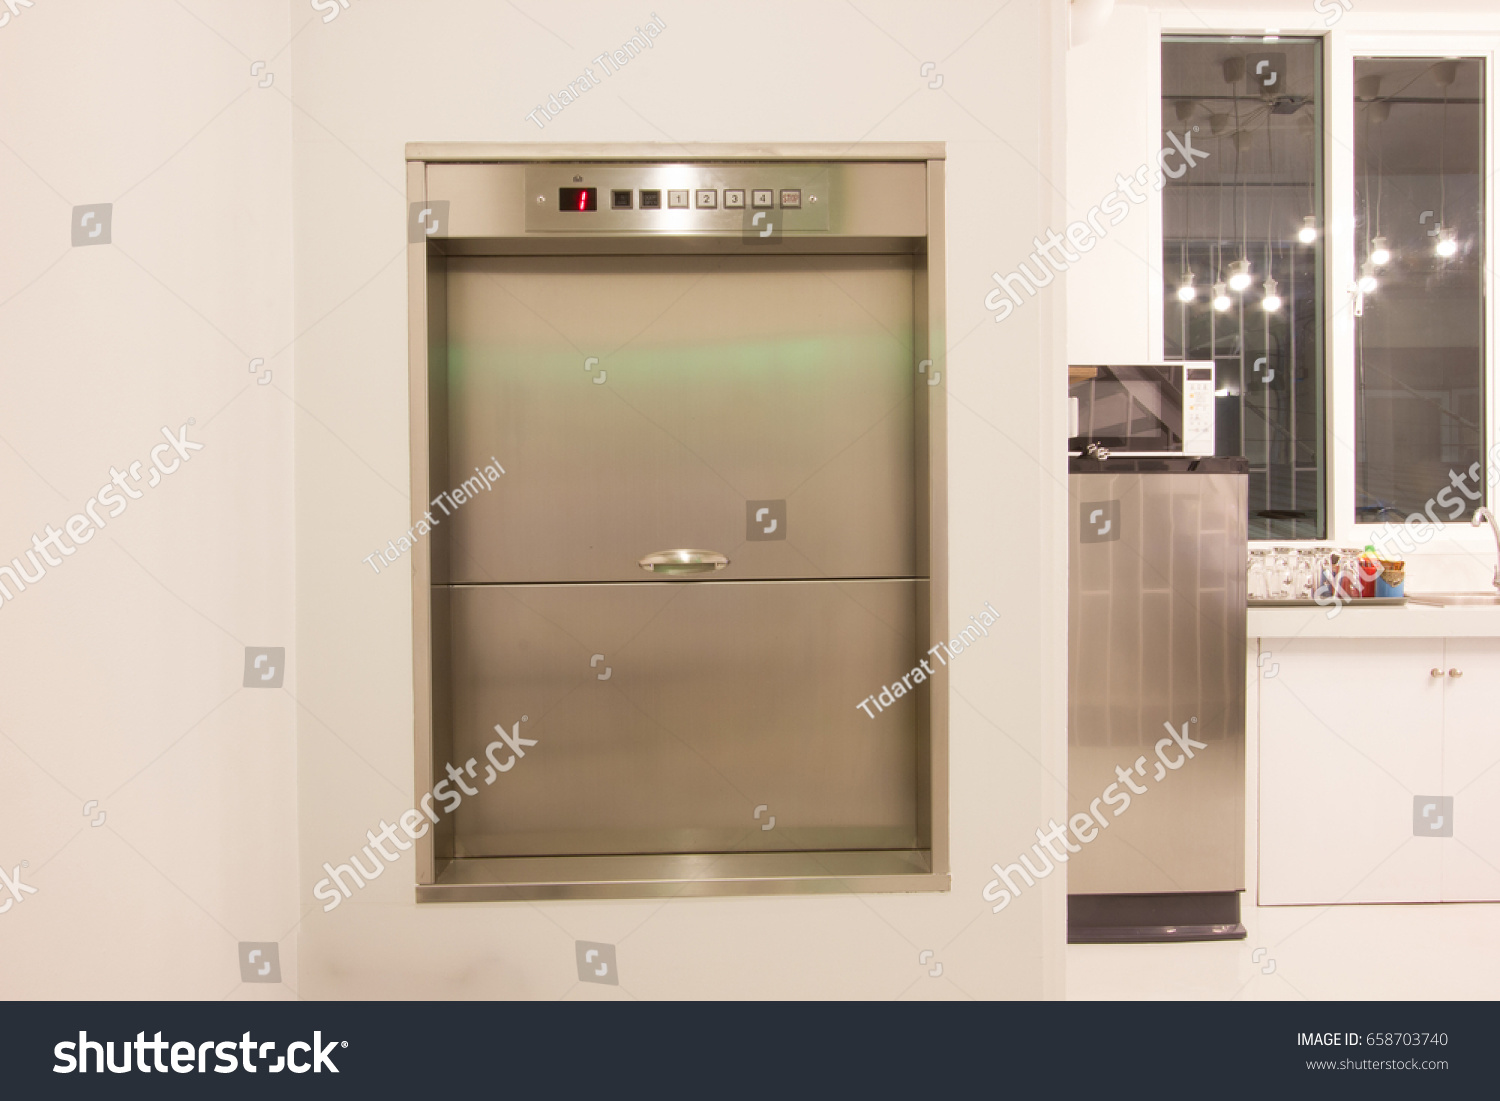 Stock Photo Dumbwaiter Lift Elevator In A Kitchen Of Rich House Used For Carrying Food Or Goods 658703740 